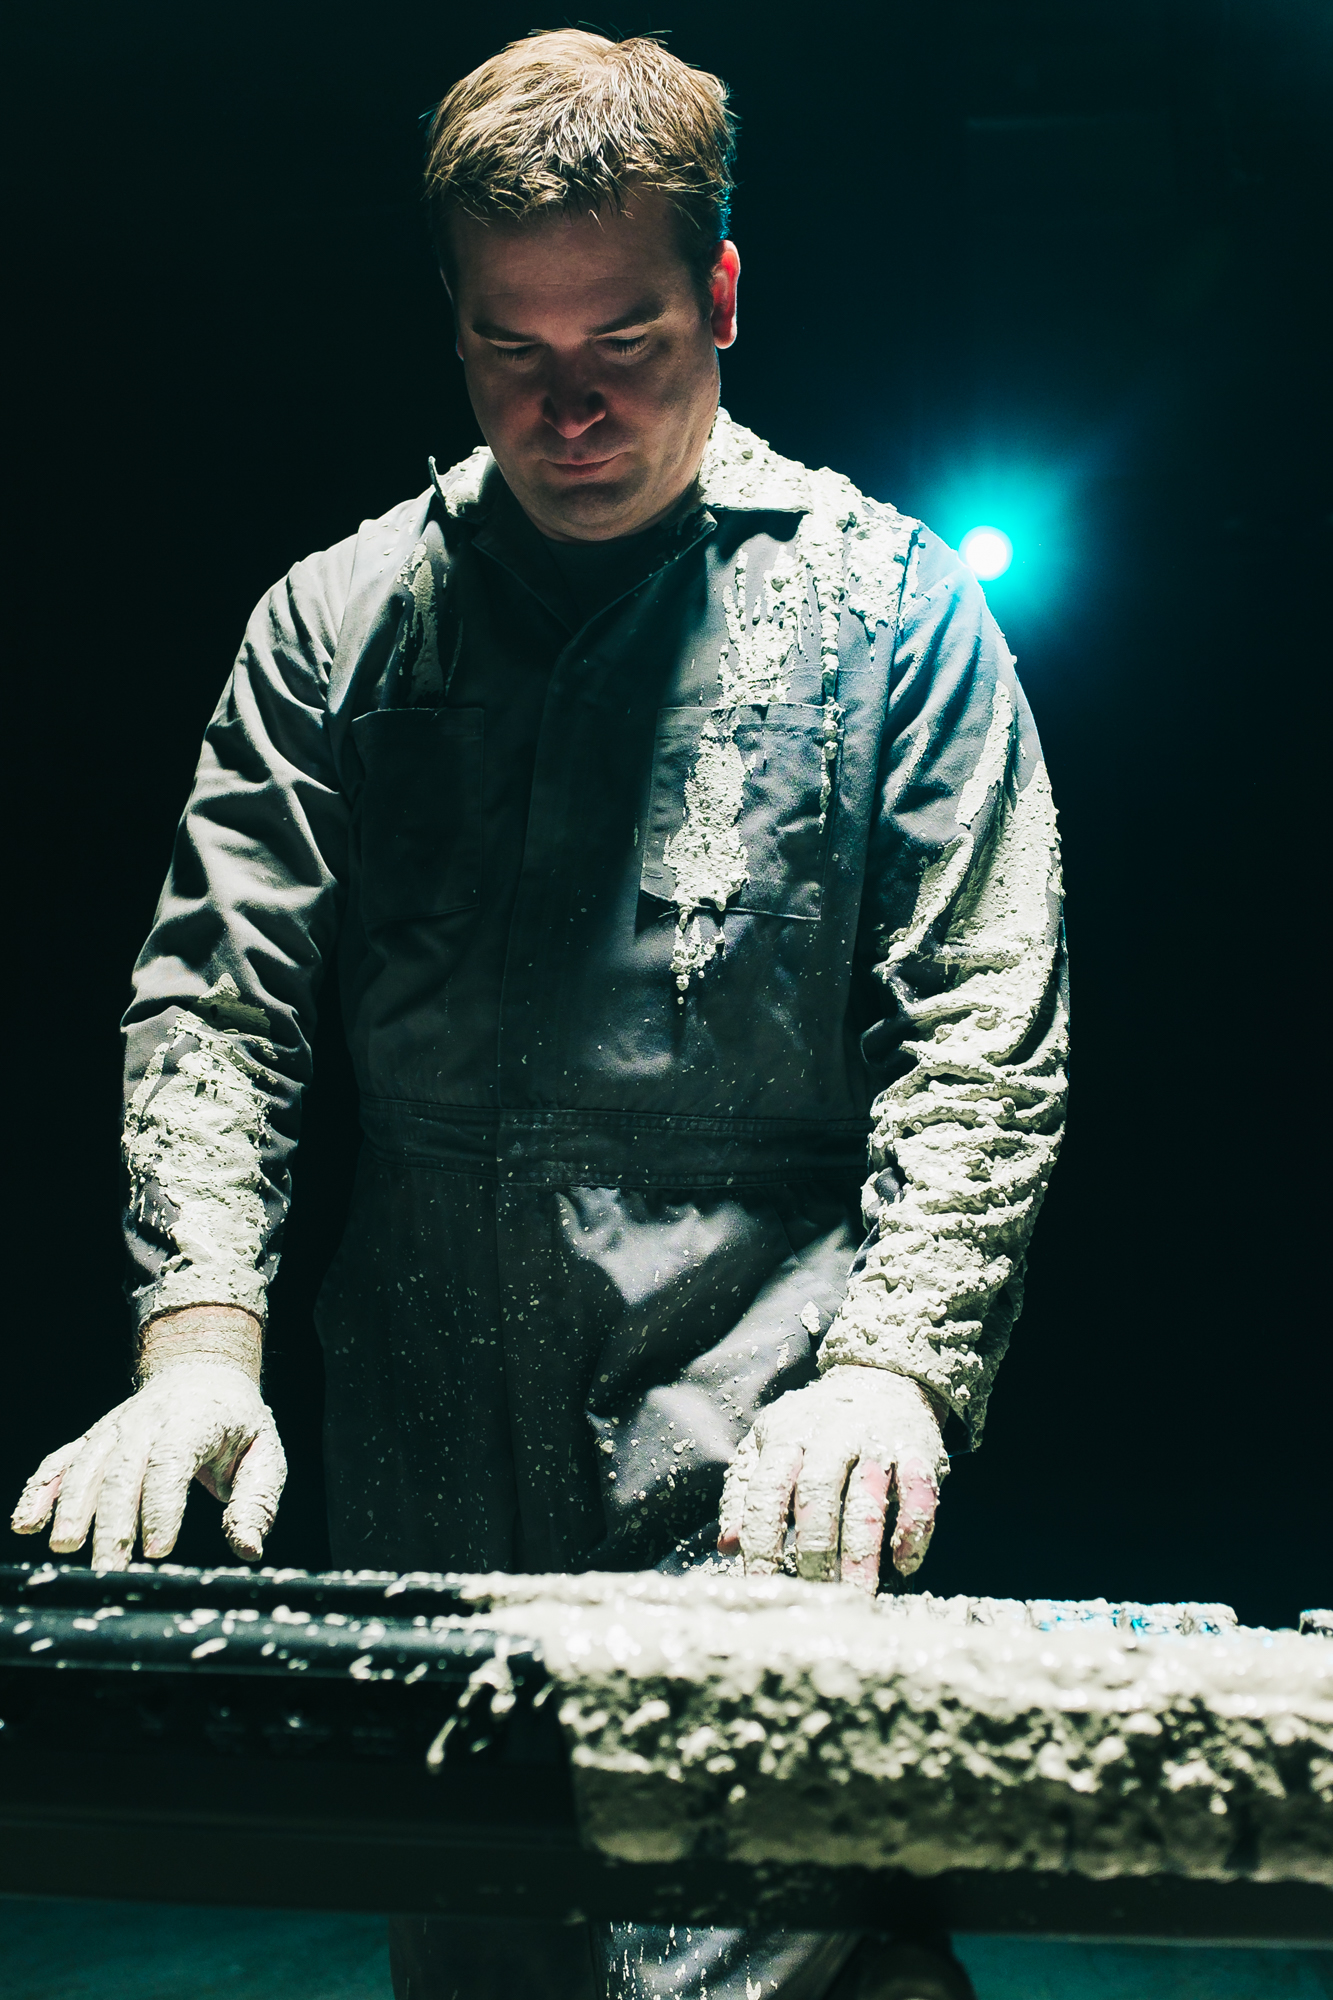 Man covered in mud dressed in overalls plays keyboard lit from above in black room.